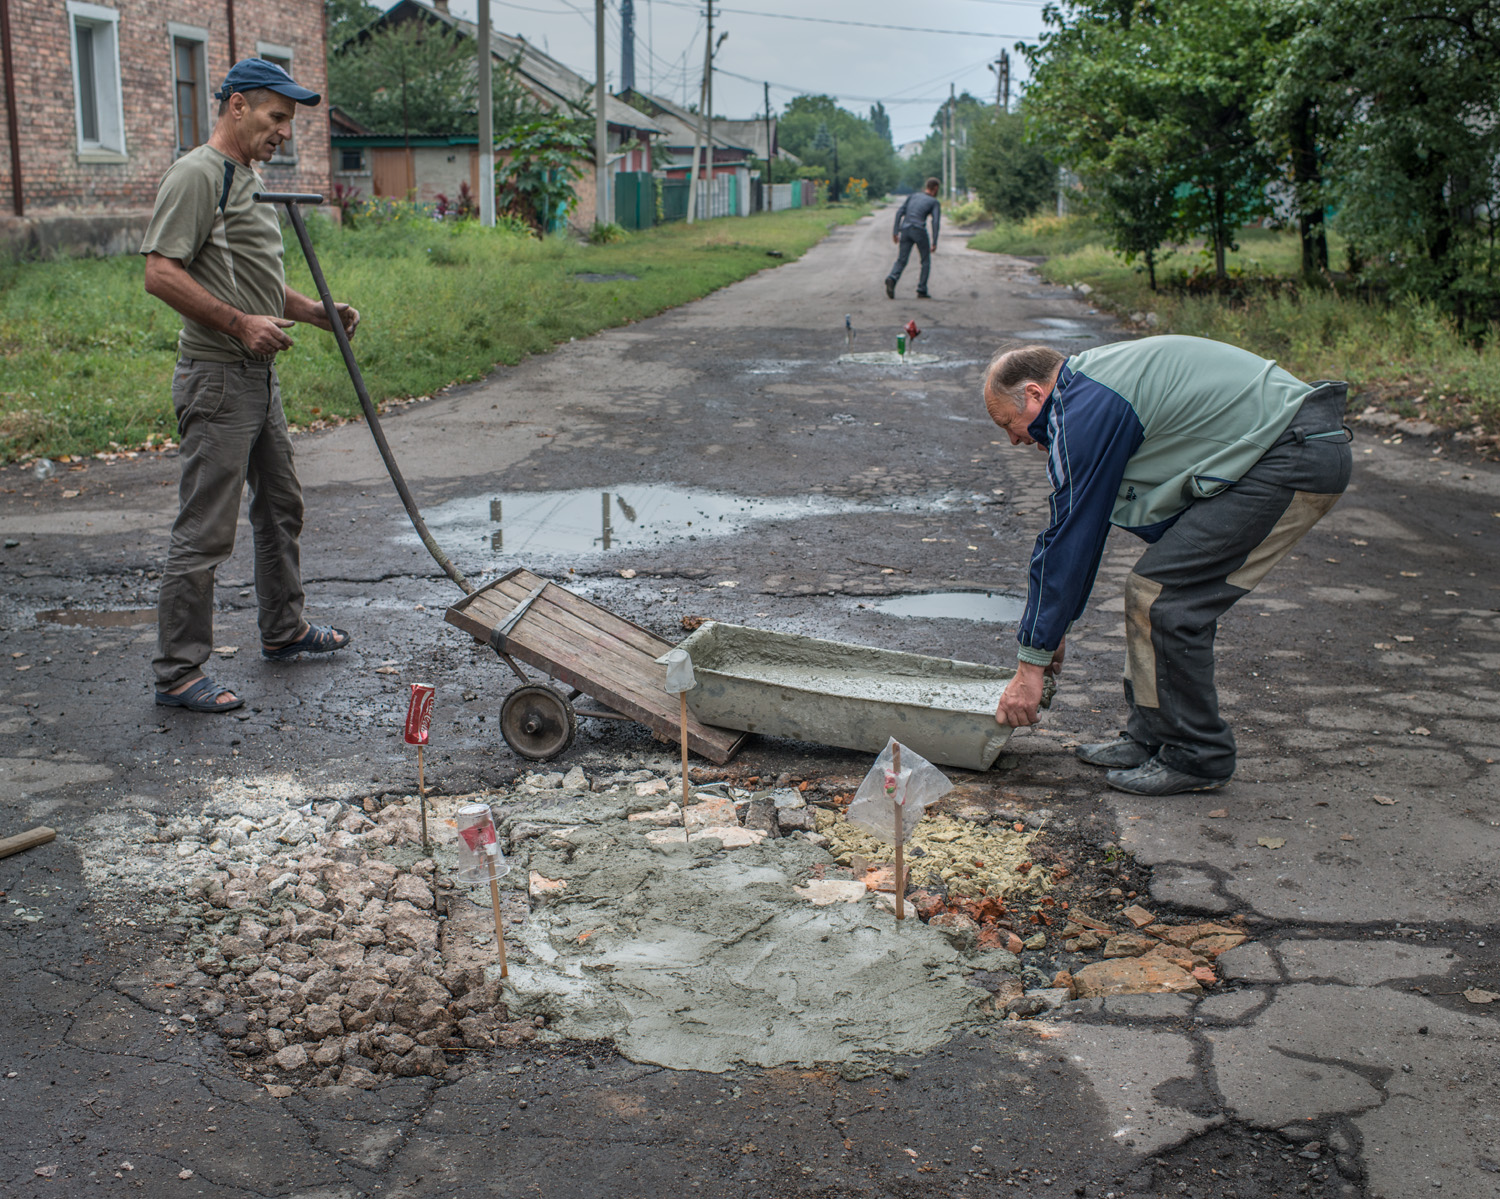  "We repaired this pothole a year ago, now we're repairing it again. Prices are going higher and it's very hard for young people to find work. I worked in the coal mine before I retired. This town was built around coal mines, but when the war started